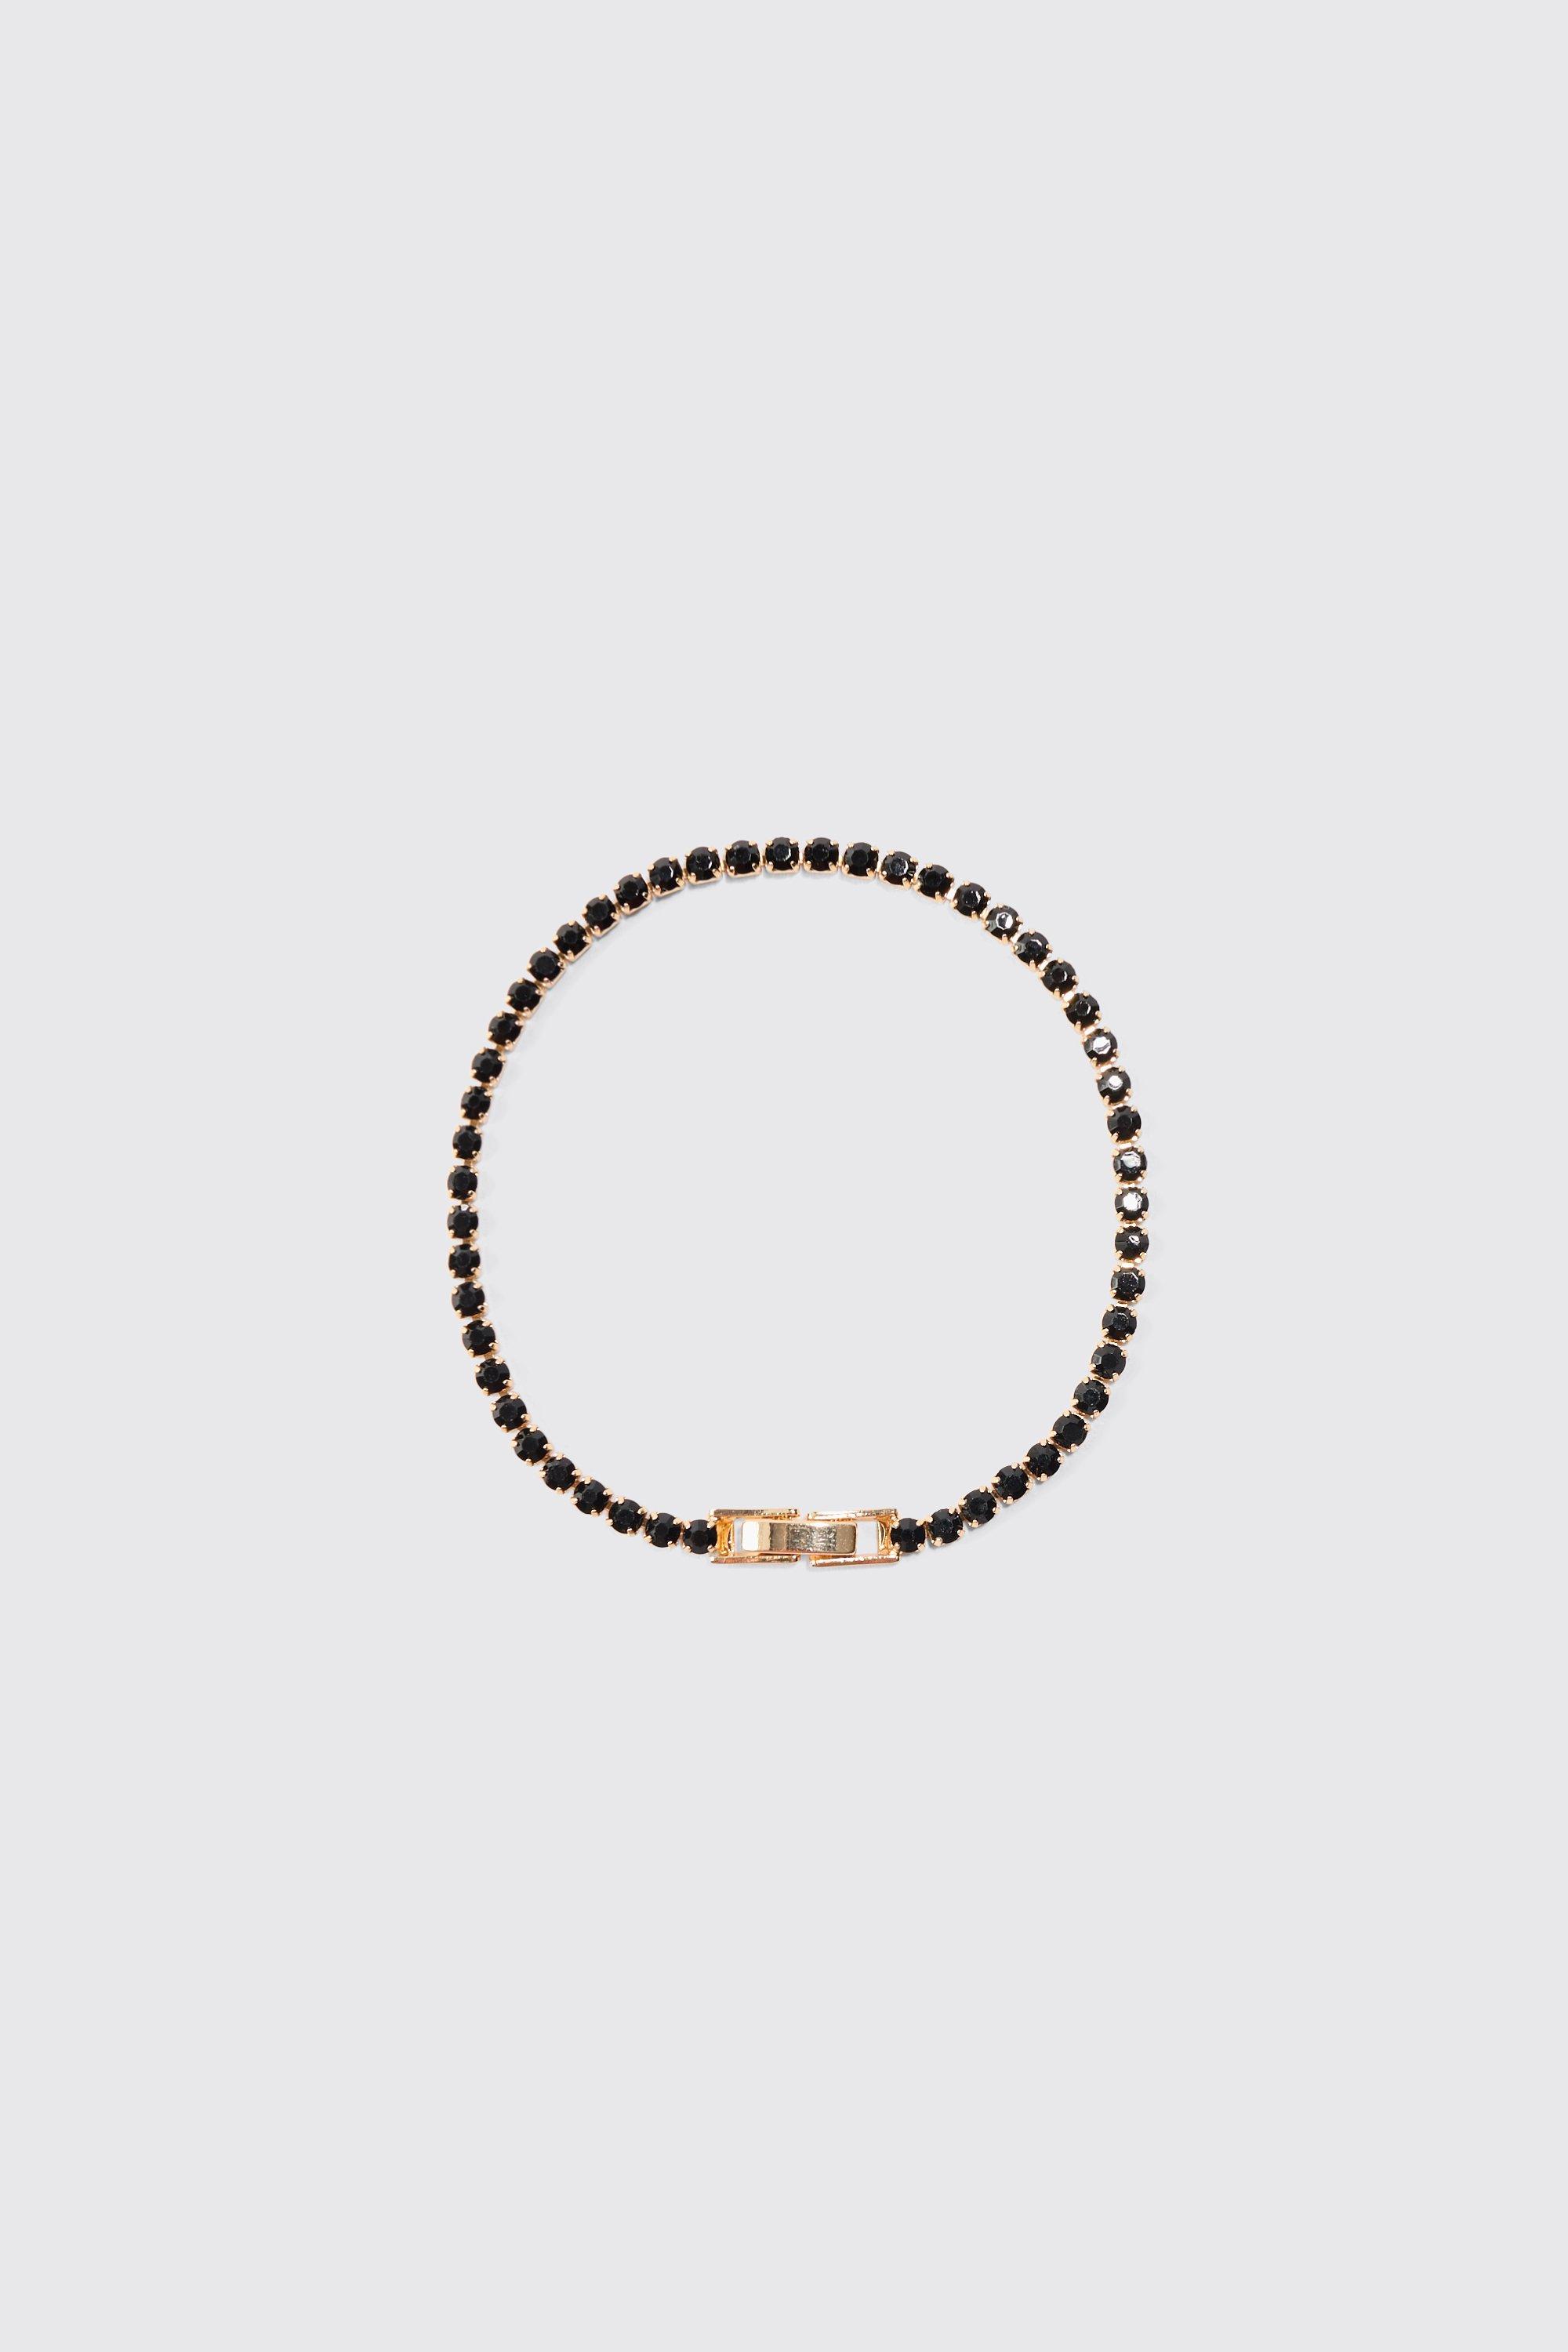 Image of Iced Bracelet With Contrast Stones In Black, Nero